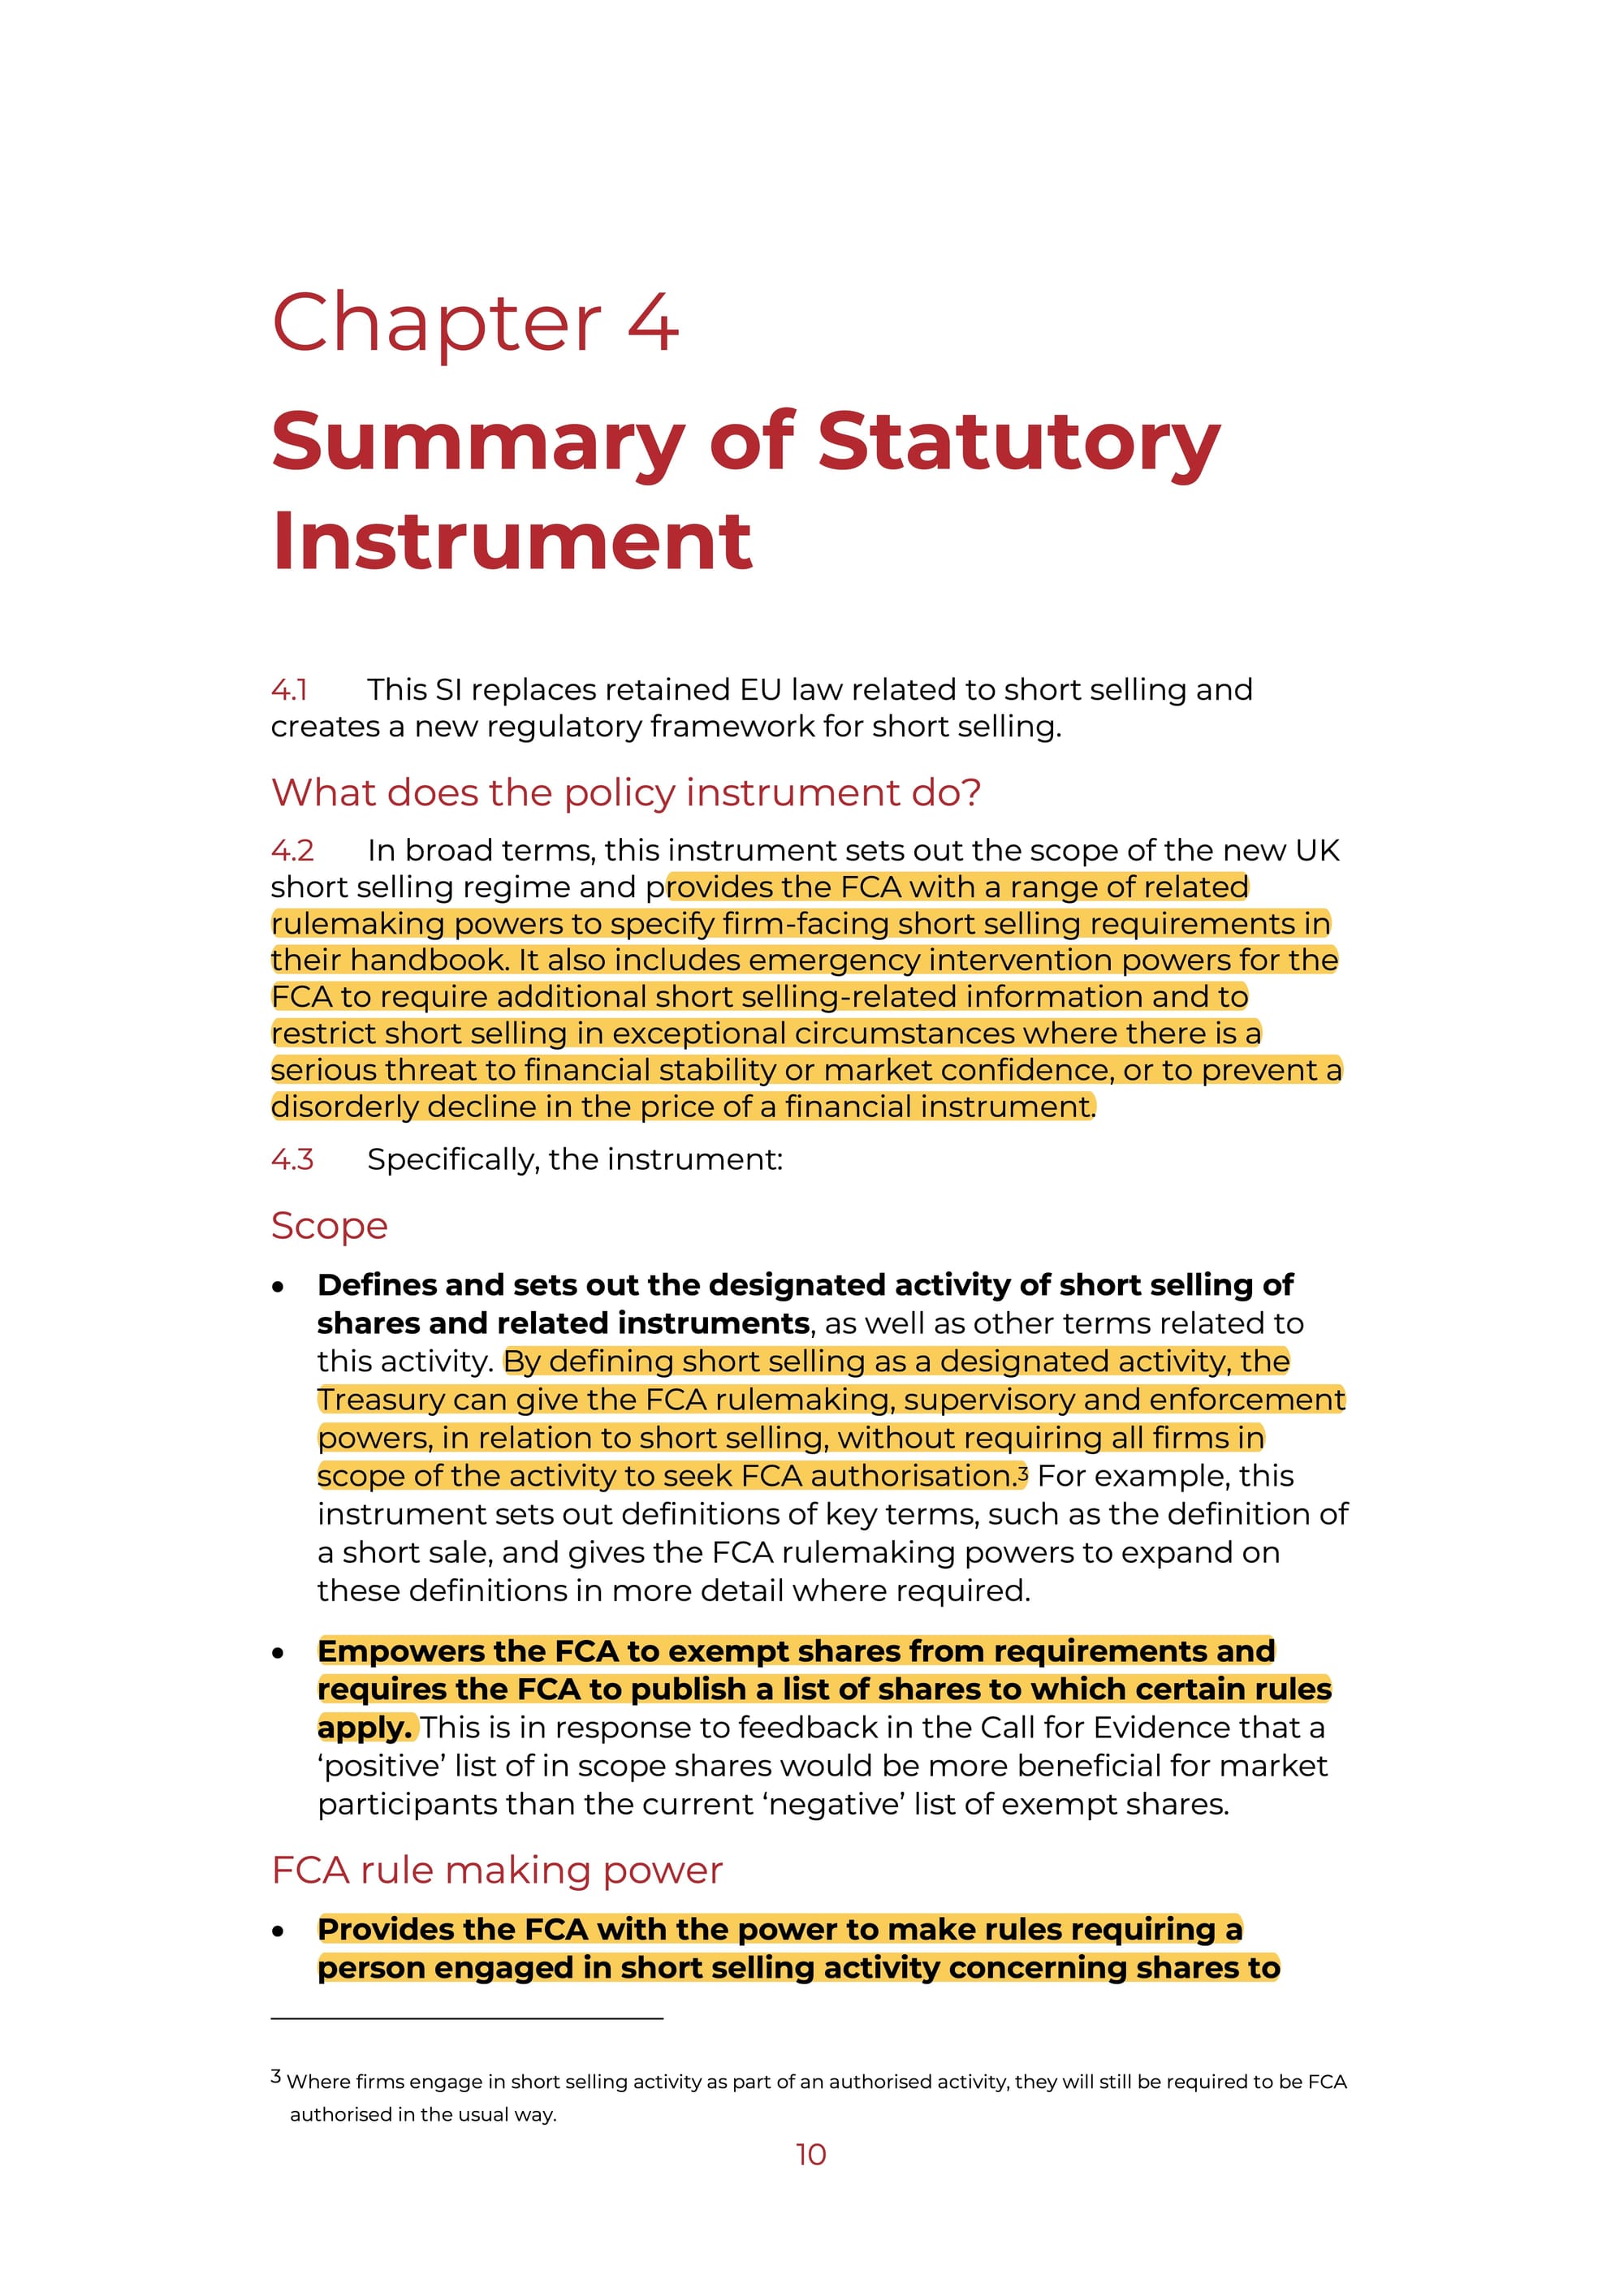 OVERVIEW OF STATUTORY INSTRUMENT - PAGE 1